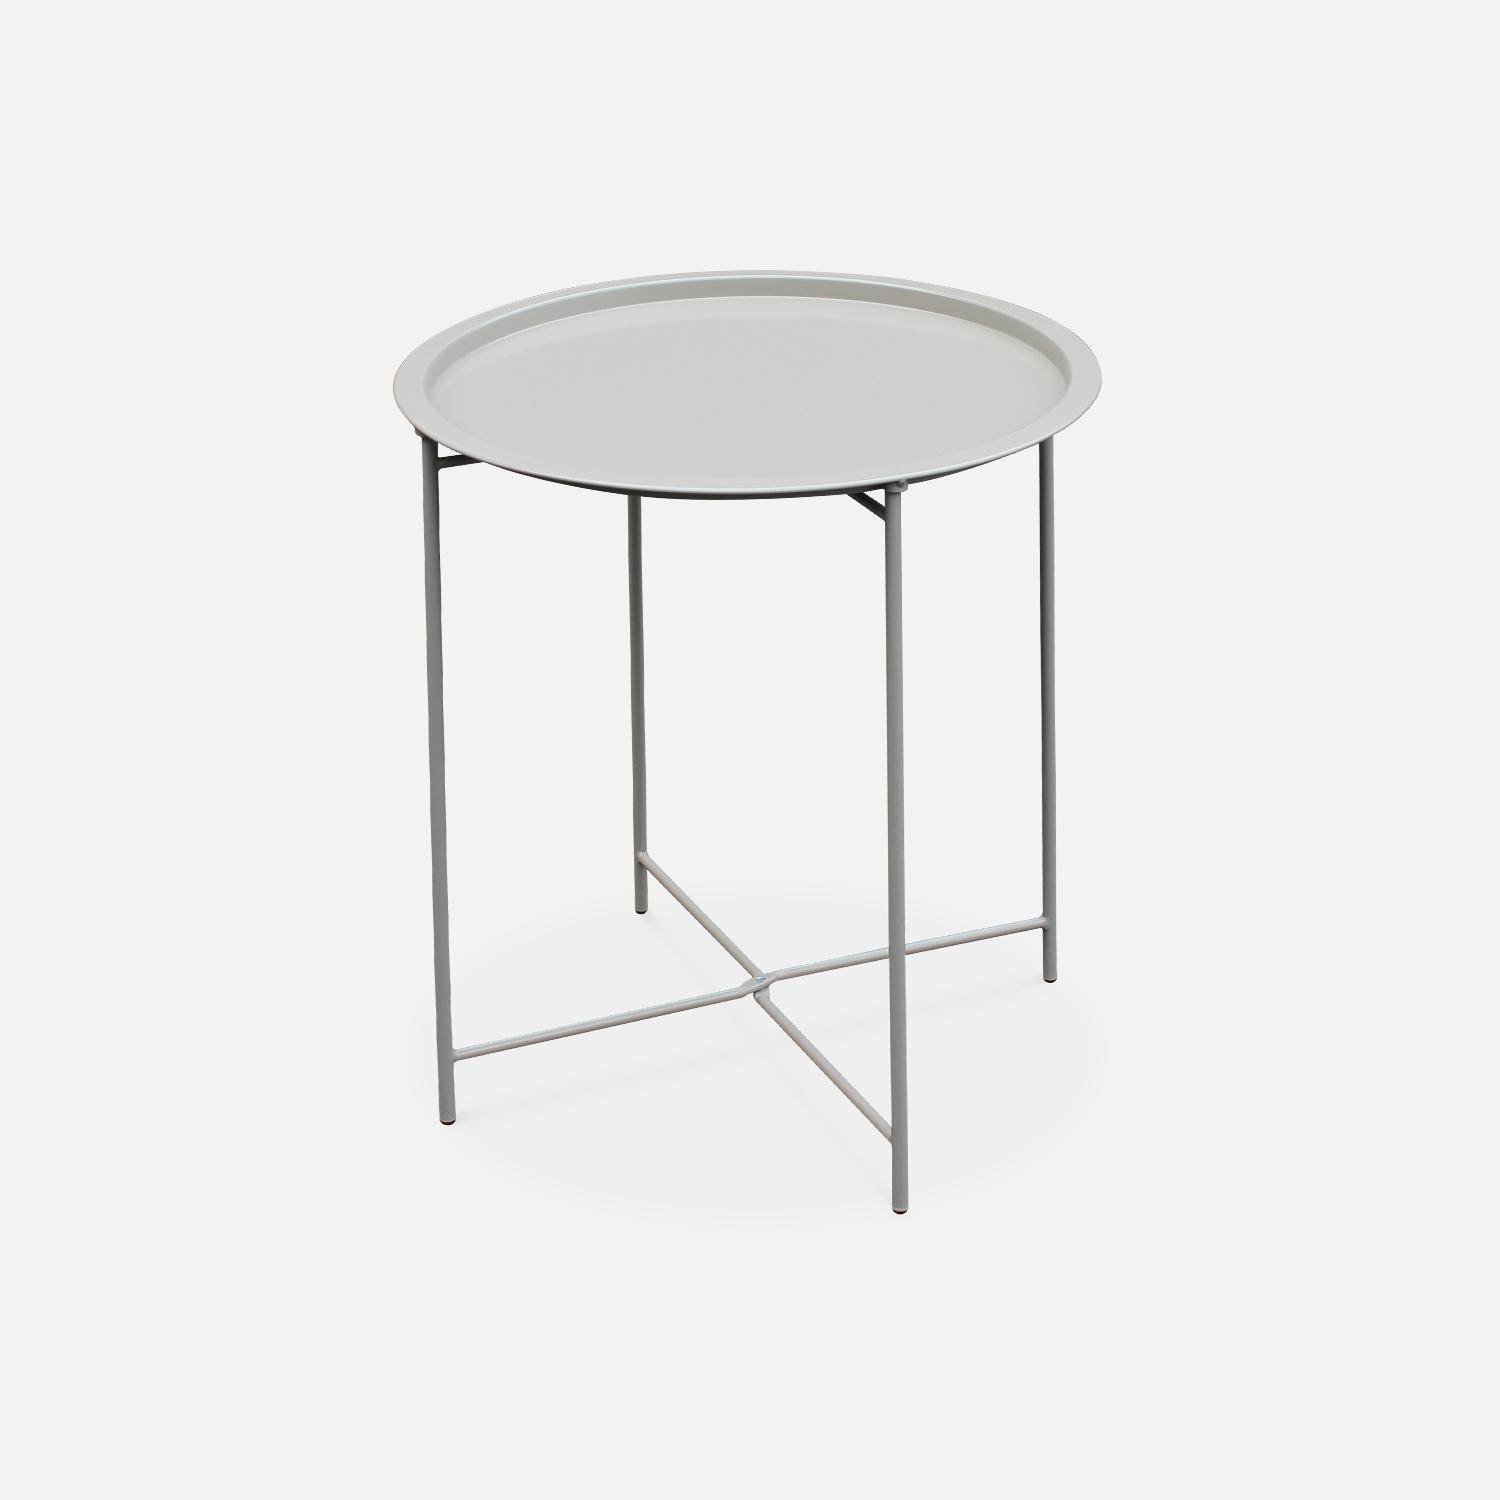 Round coffee table - Alexia Taupe Grey - Round side table Ø46cm, powder-coated steel,sweeek,Photo2